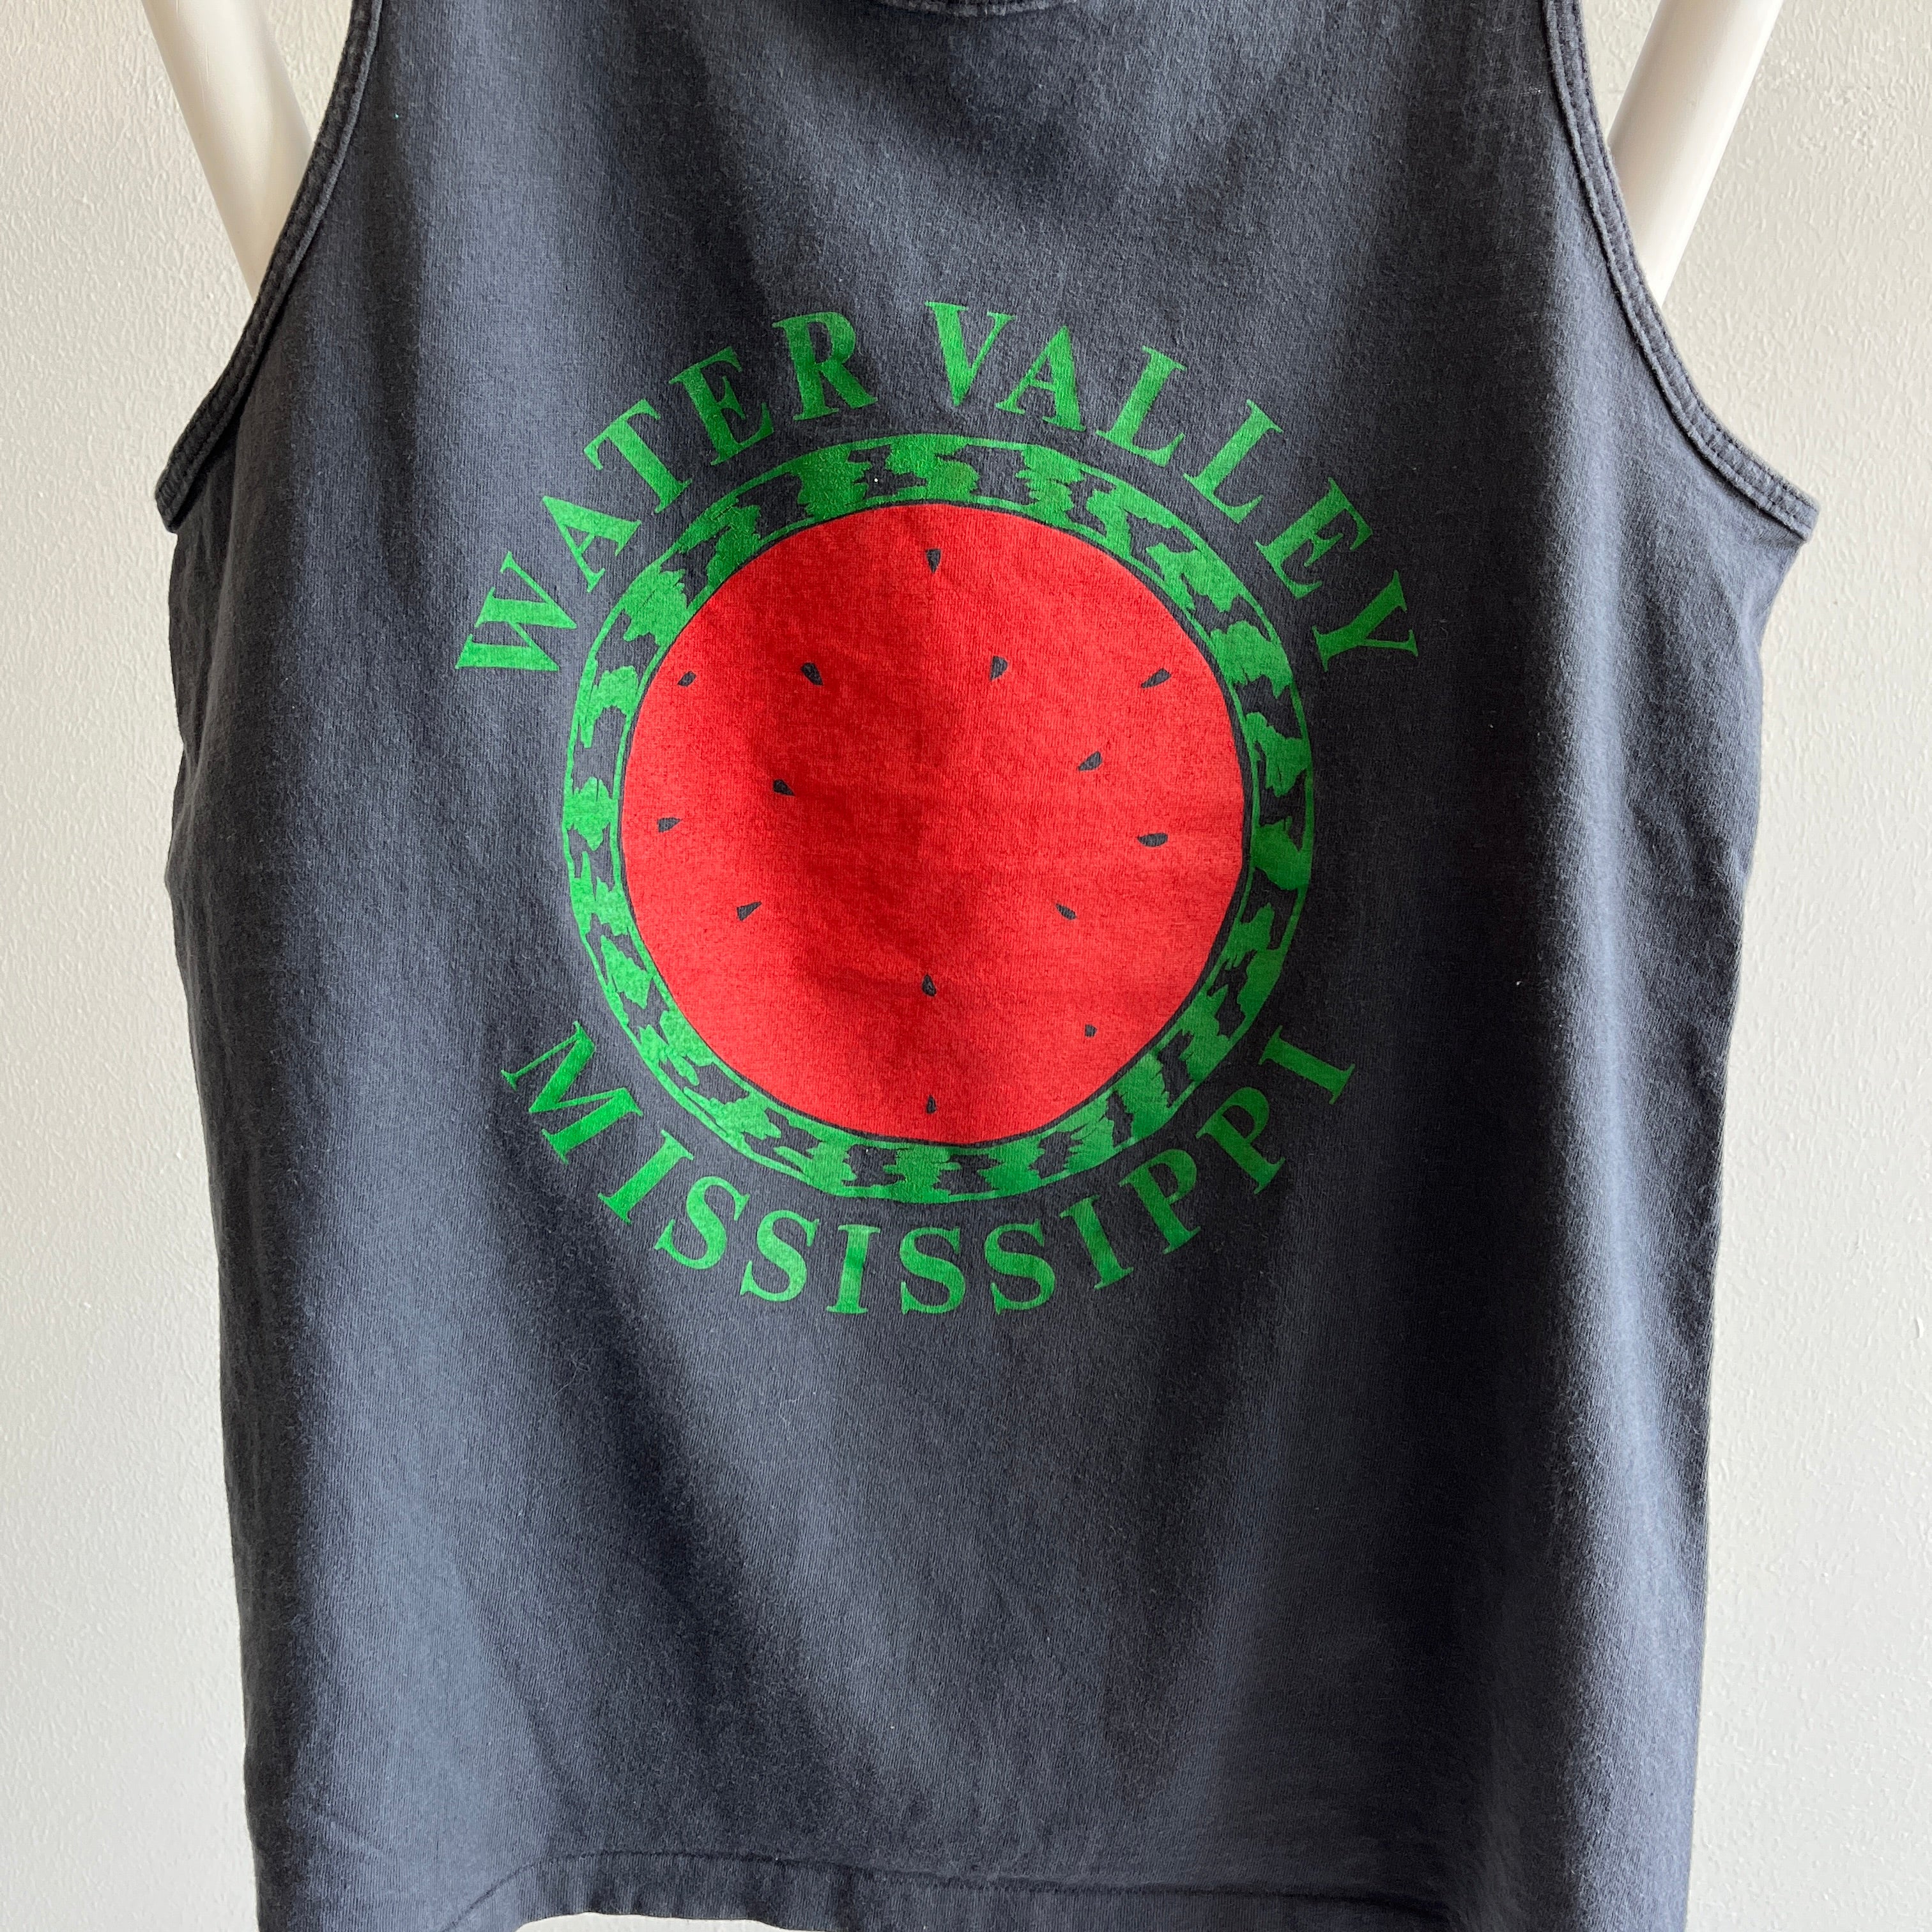 1980s Water Valley Mississippi Faded Cotton Tank Top by Hanes